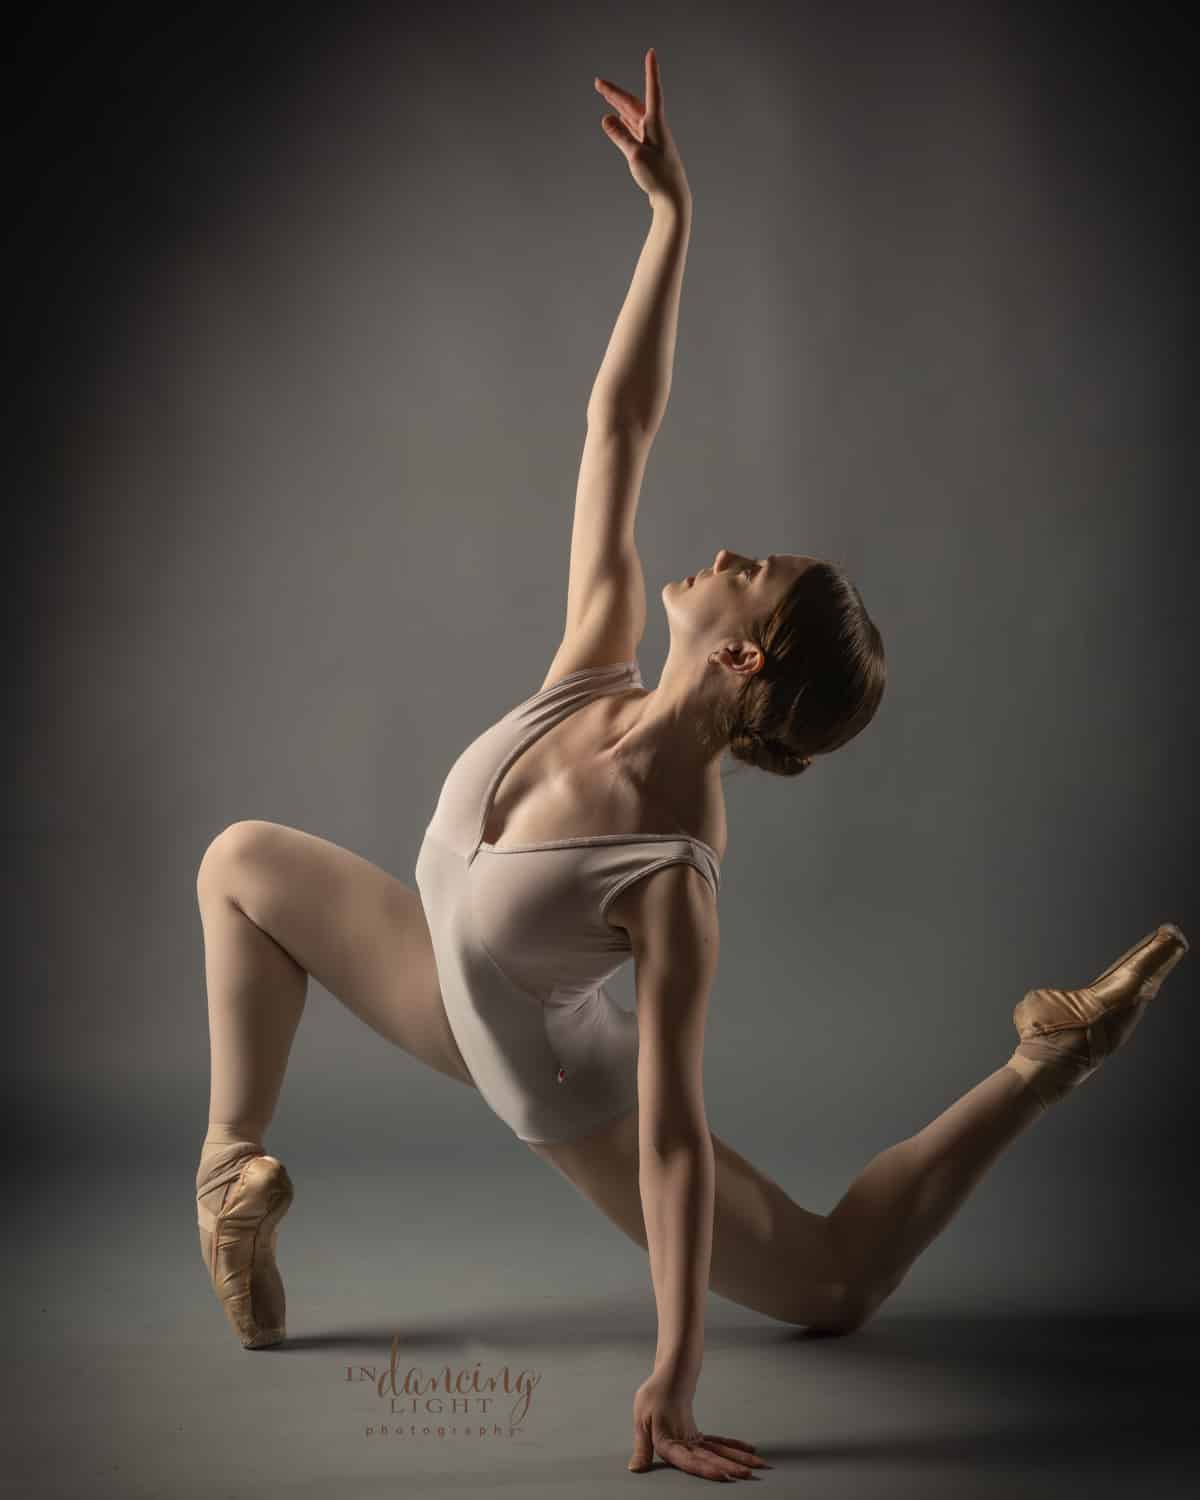 Ballet dancer with dynamic leading lines